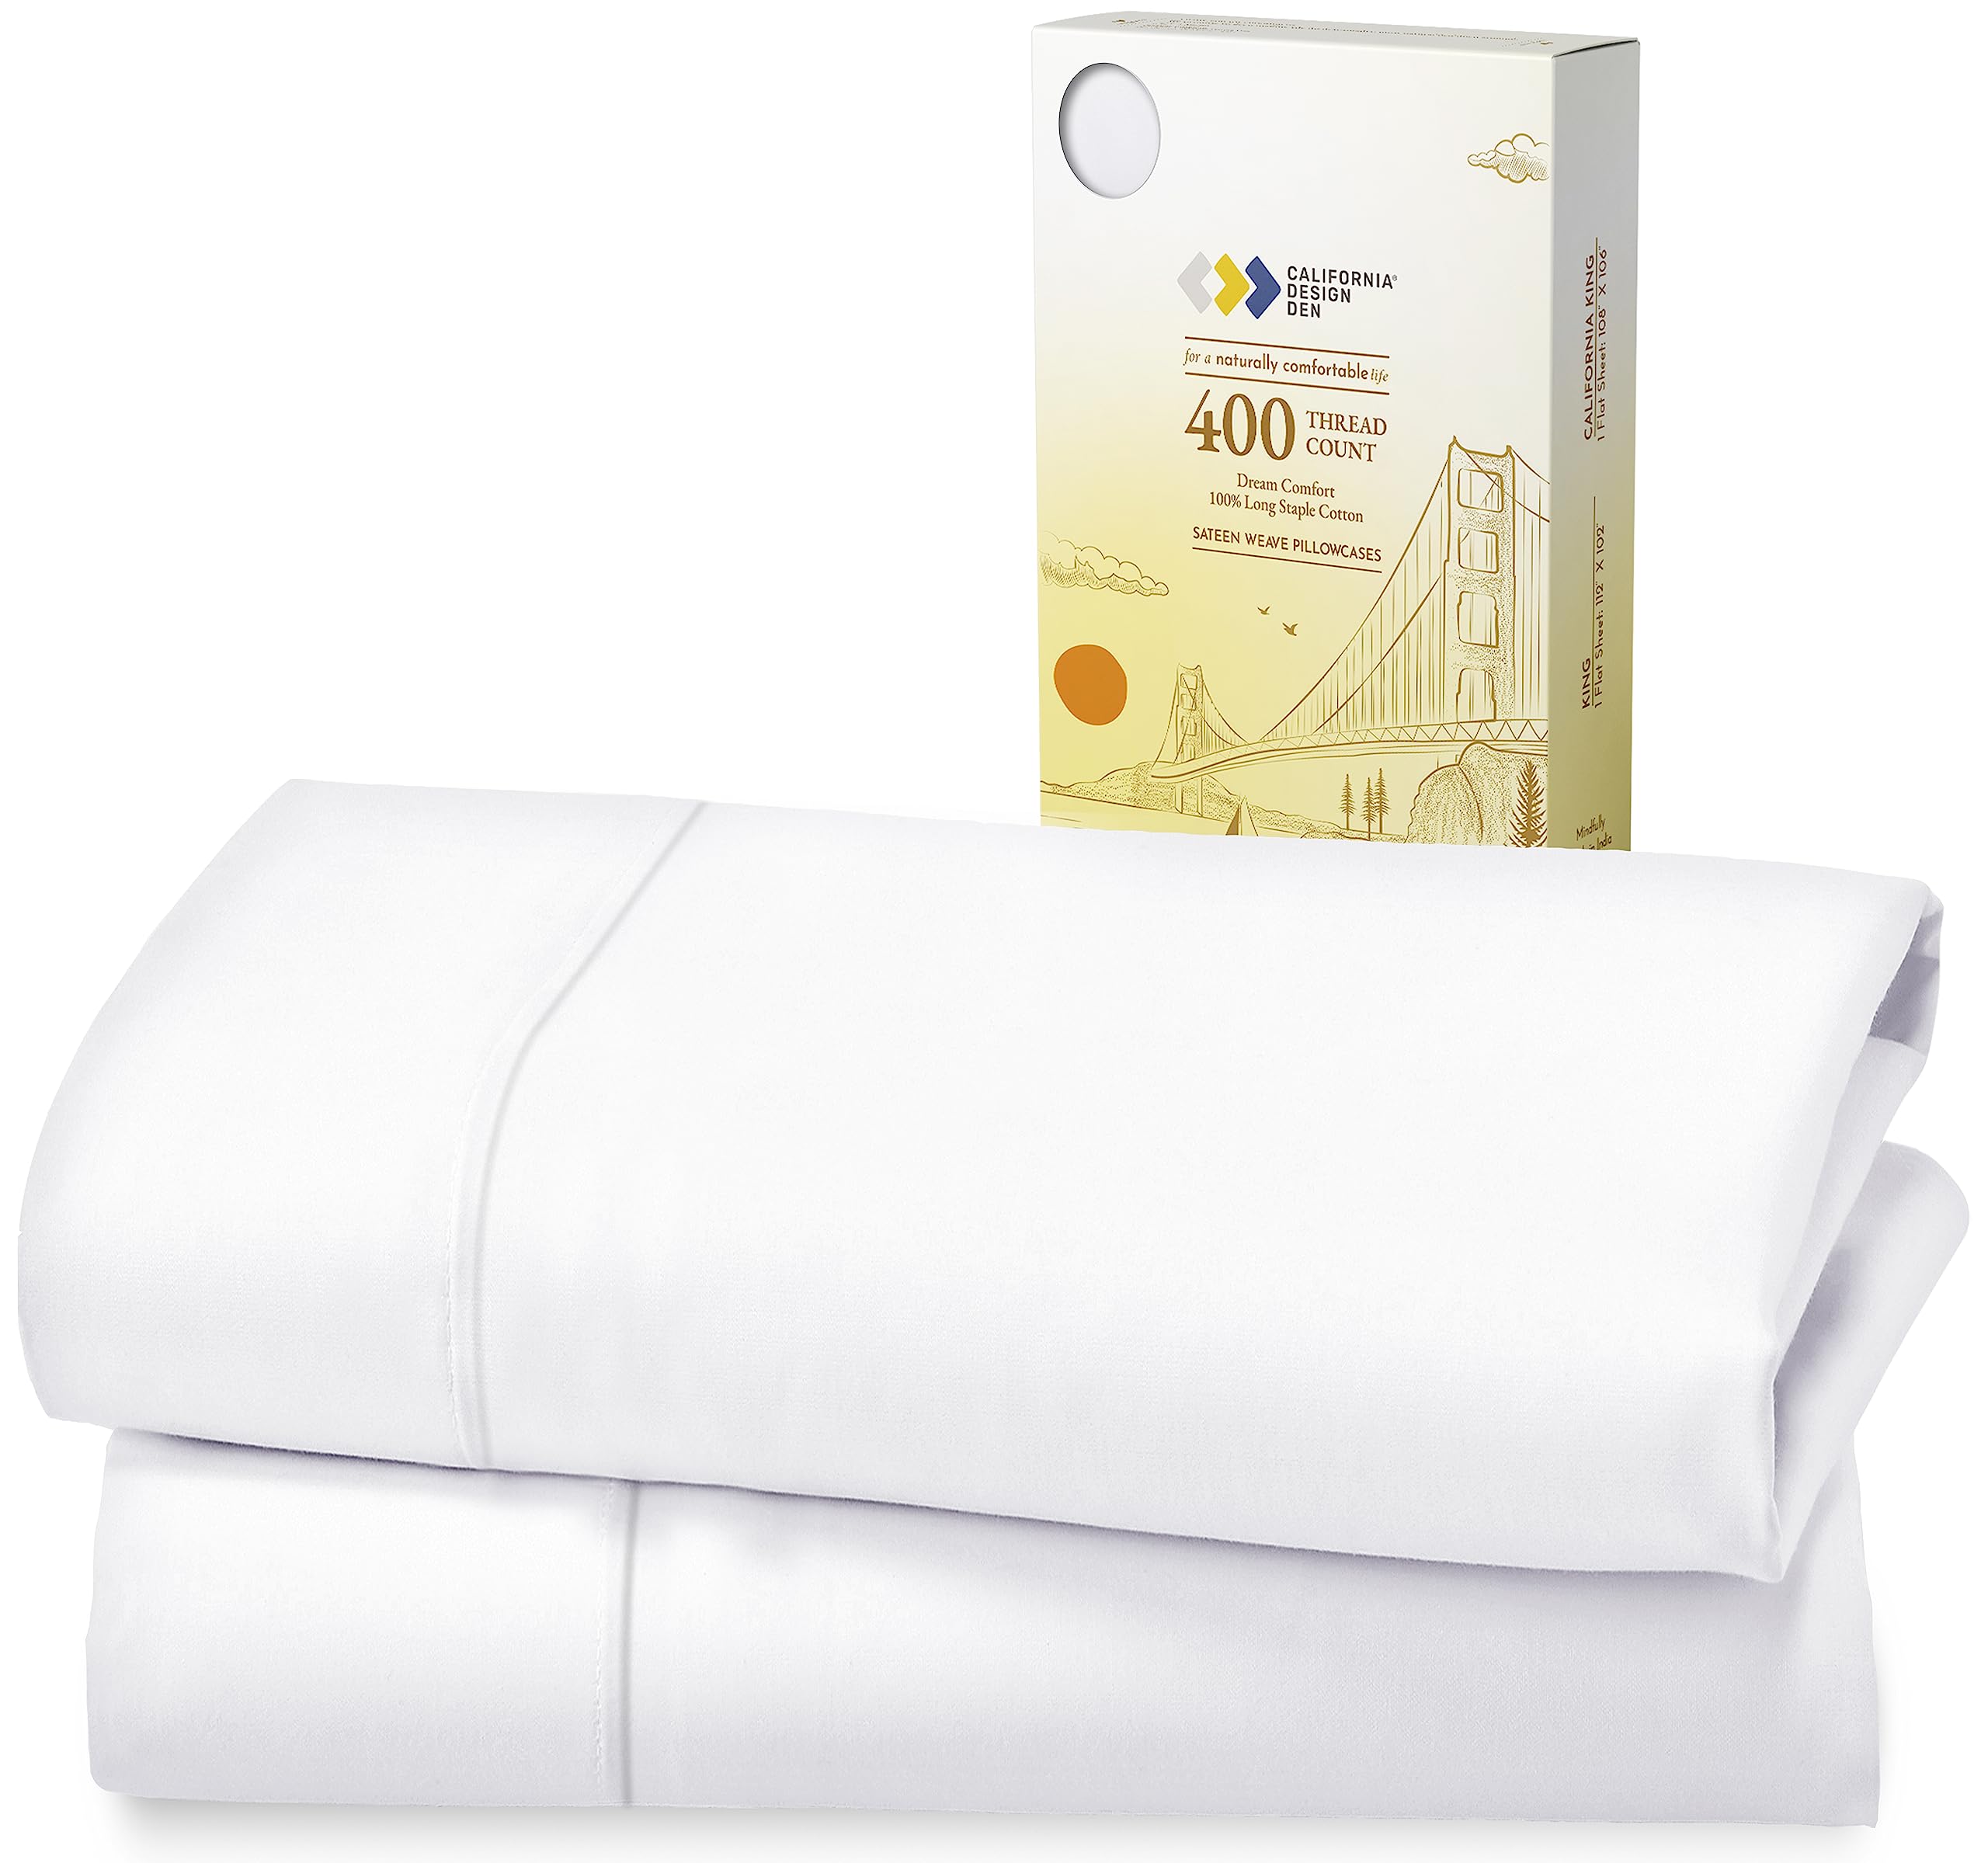 Book Cover King Size Pillow Case Set of 2 100% Cotton Cases, 400 Thread Count Sateen, Pure White Pillow Case Cover - Perfect for Home, Hotels & Hospital Use